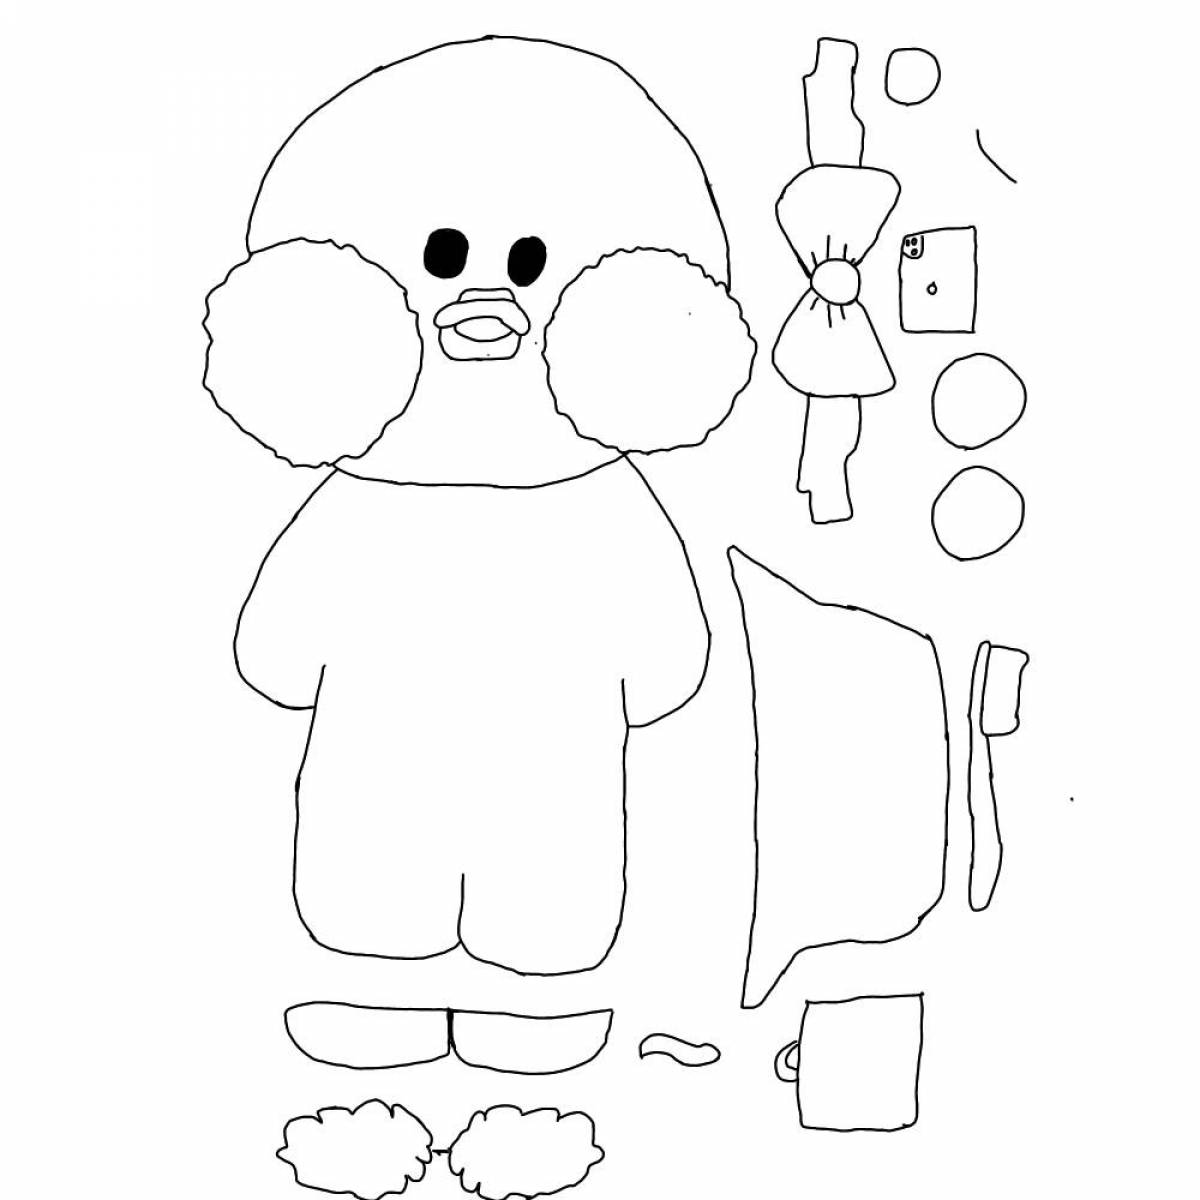 Animated lalafan duck coloring page